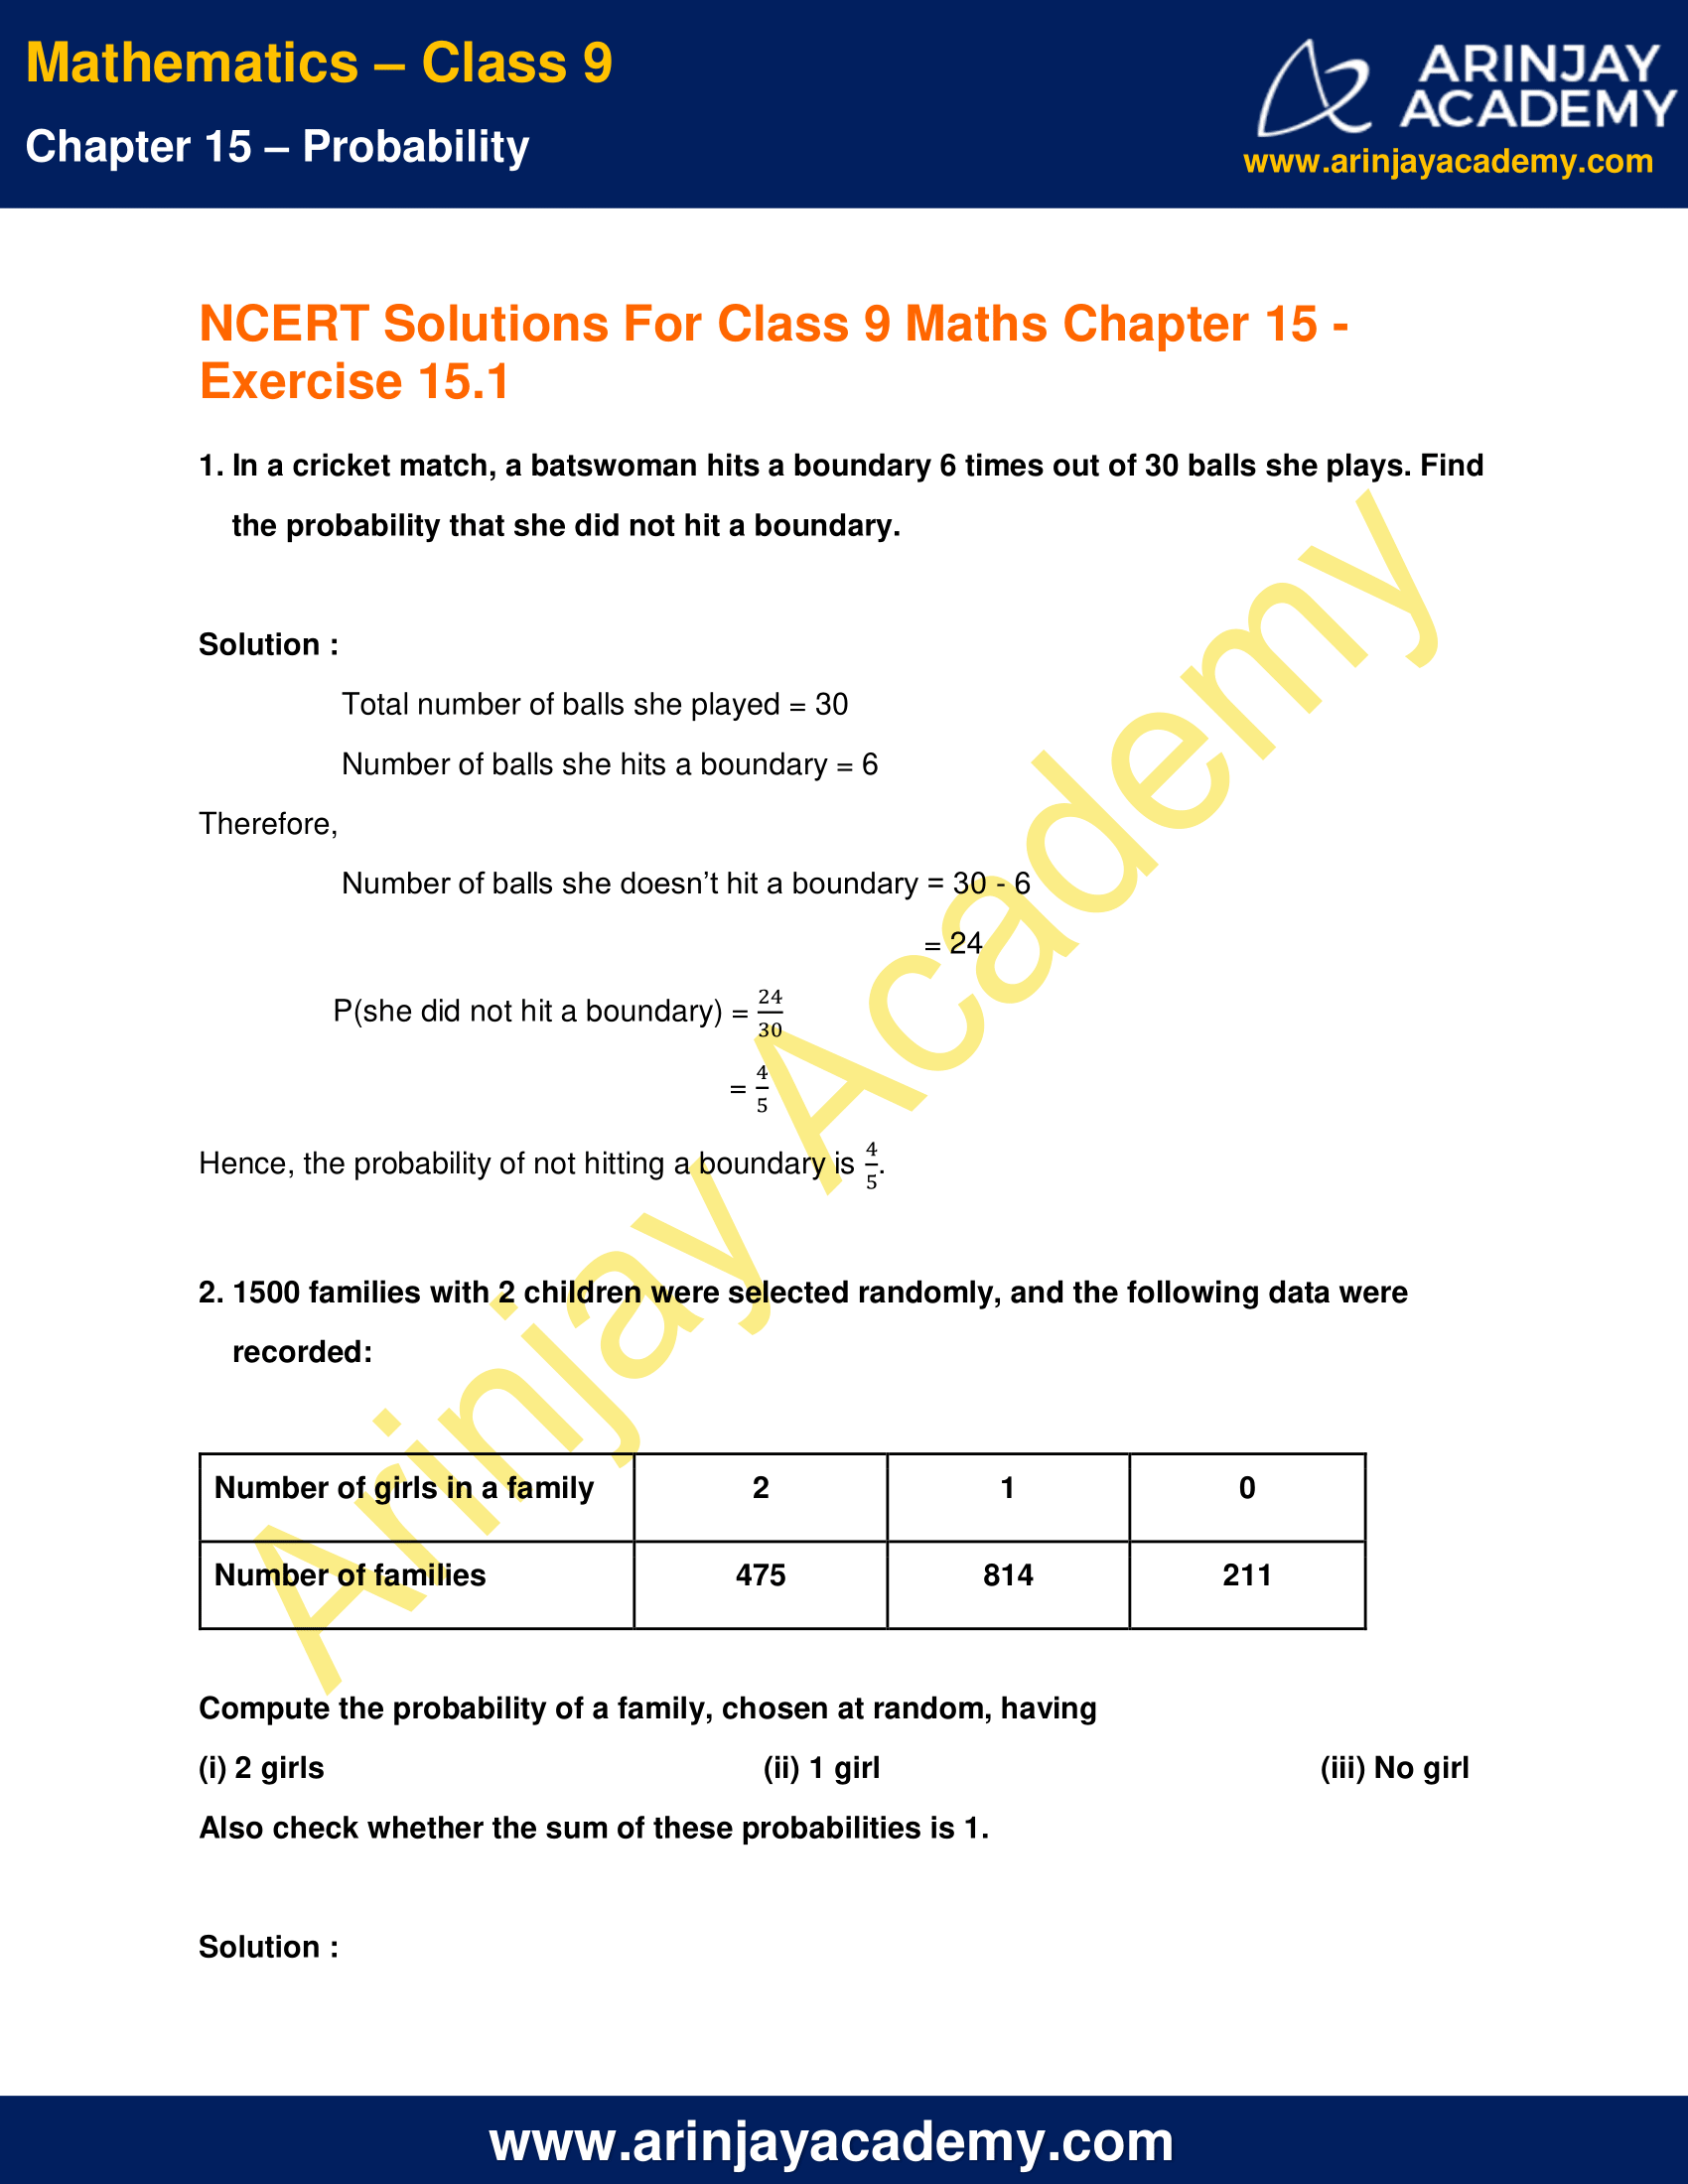 NCERT Solutions for Class 9 Maths Chapter 15 Exercise 15.1 image 1